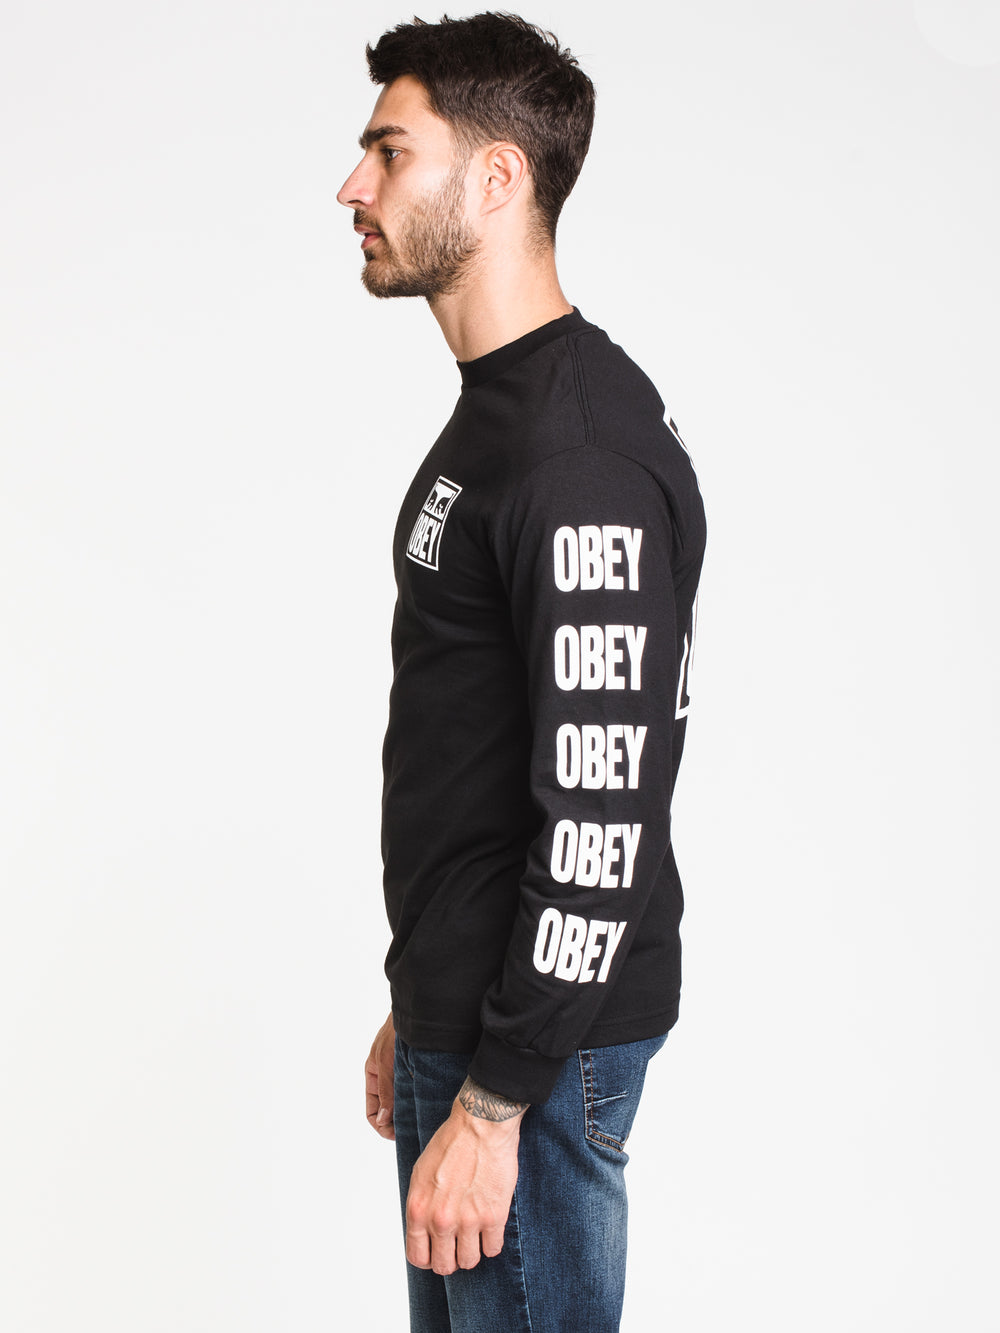 VISION OF OBEY LONG SLEEVE T-SHIRT - CLEARANCE